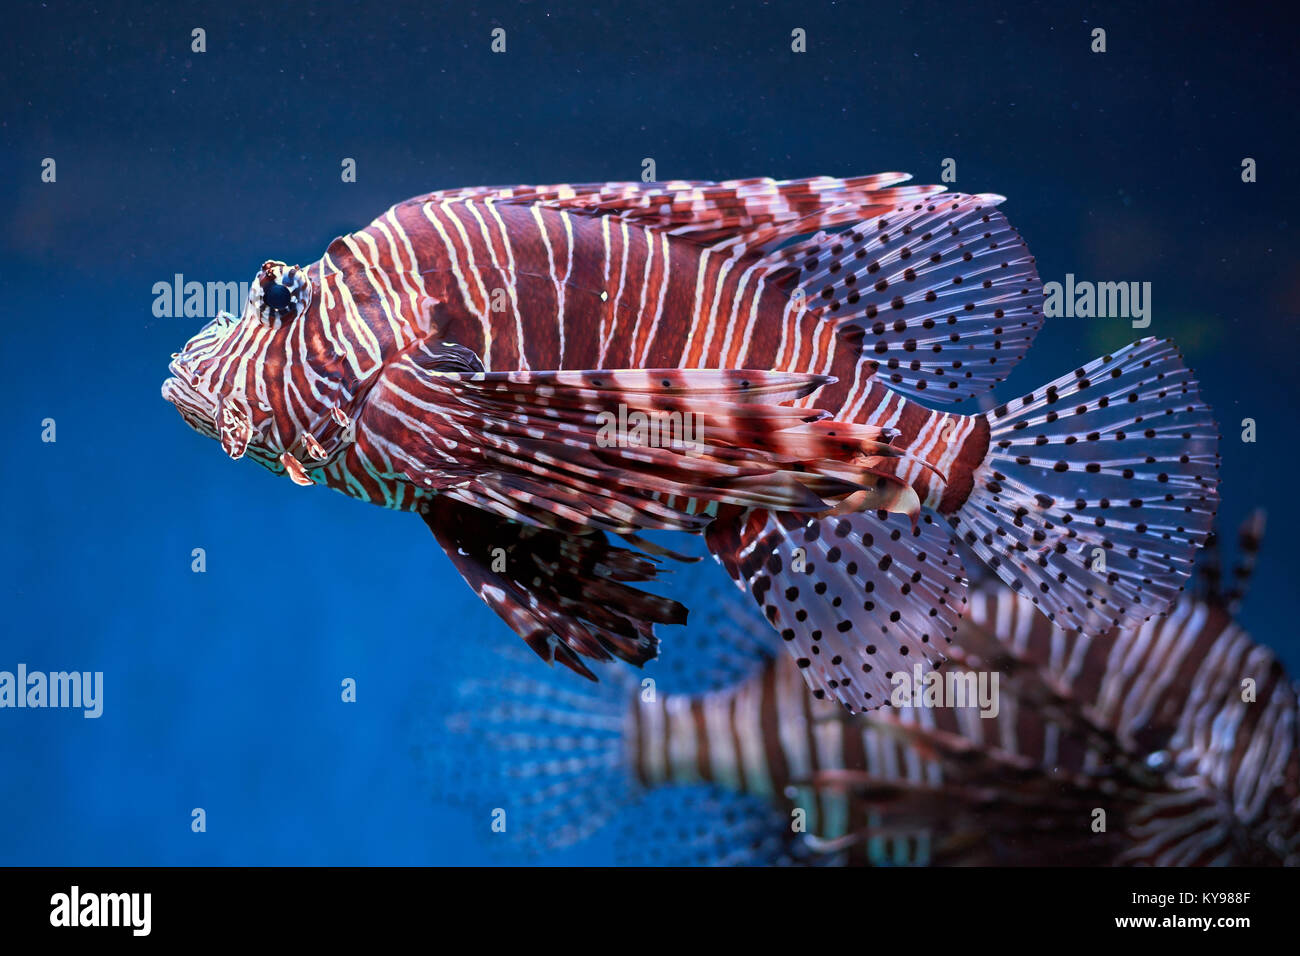 Pterois (lionfish, zebrafish so on) with long venomous fins in blue water Stock Photo